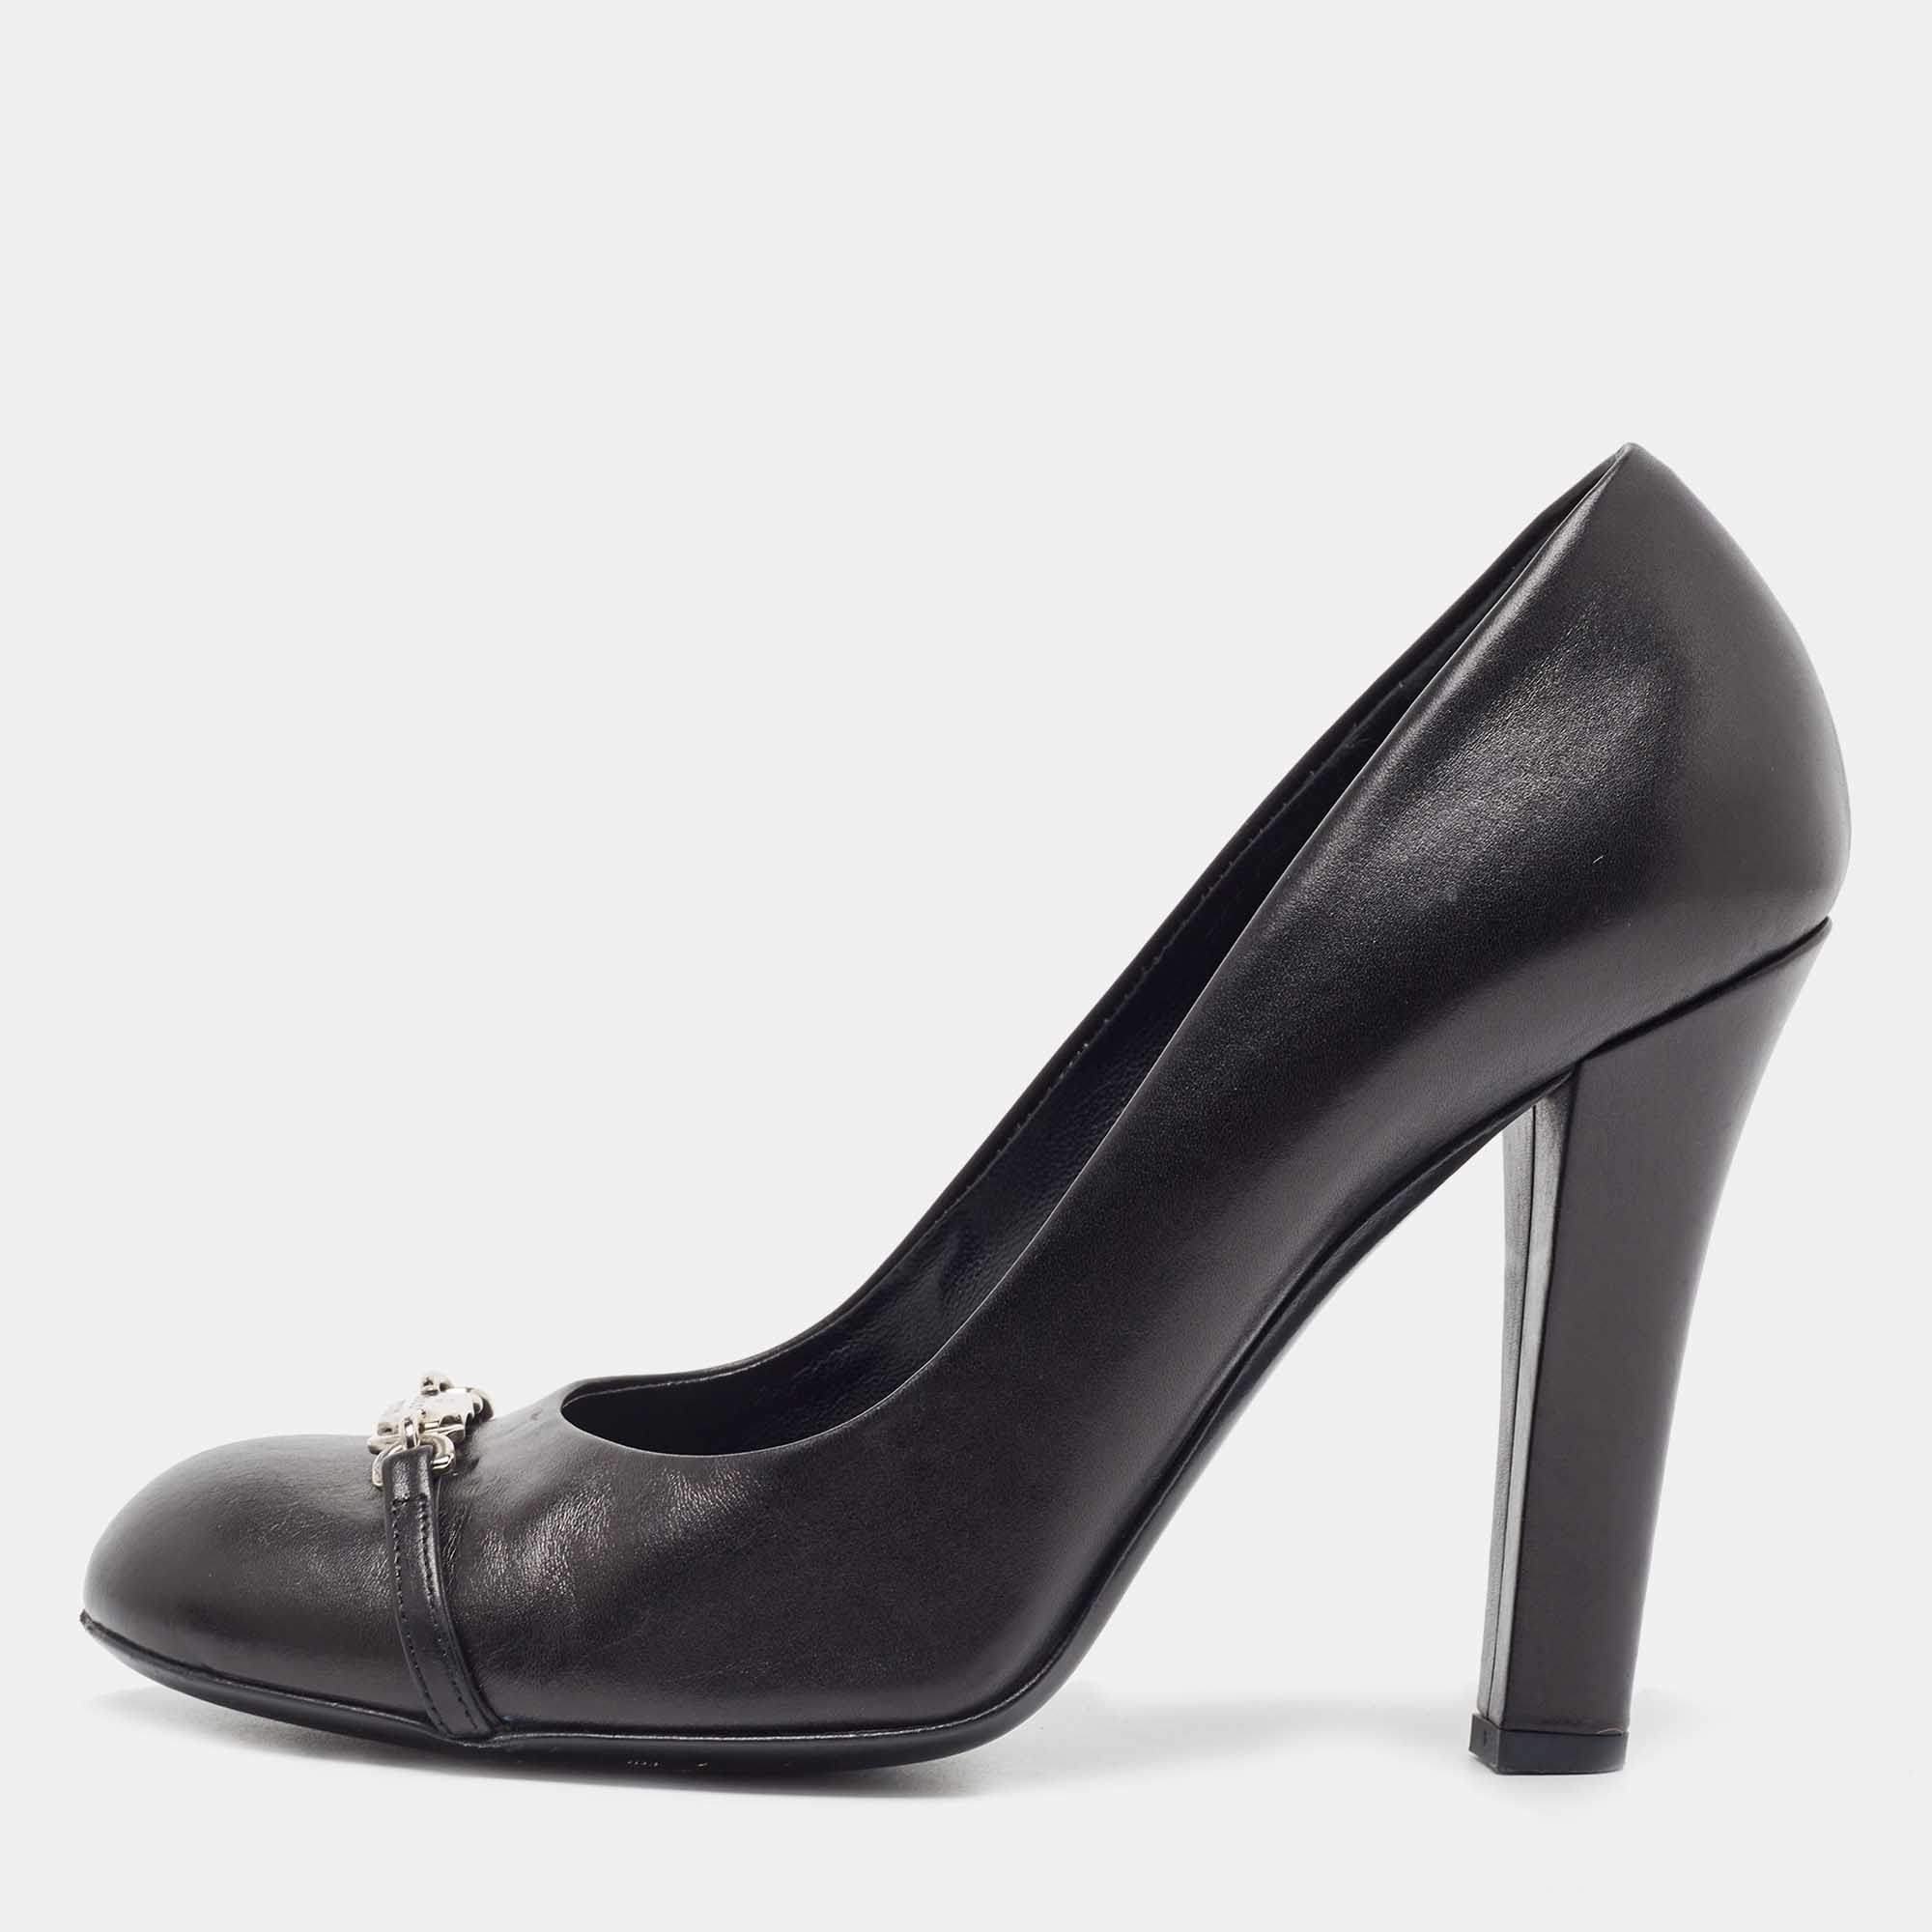 Pre-owned Gucci Black Leather Round Toe Pumps Size 39